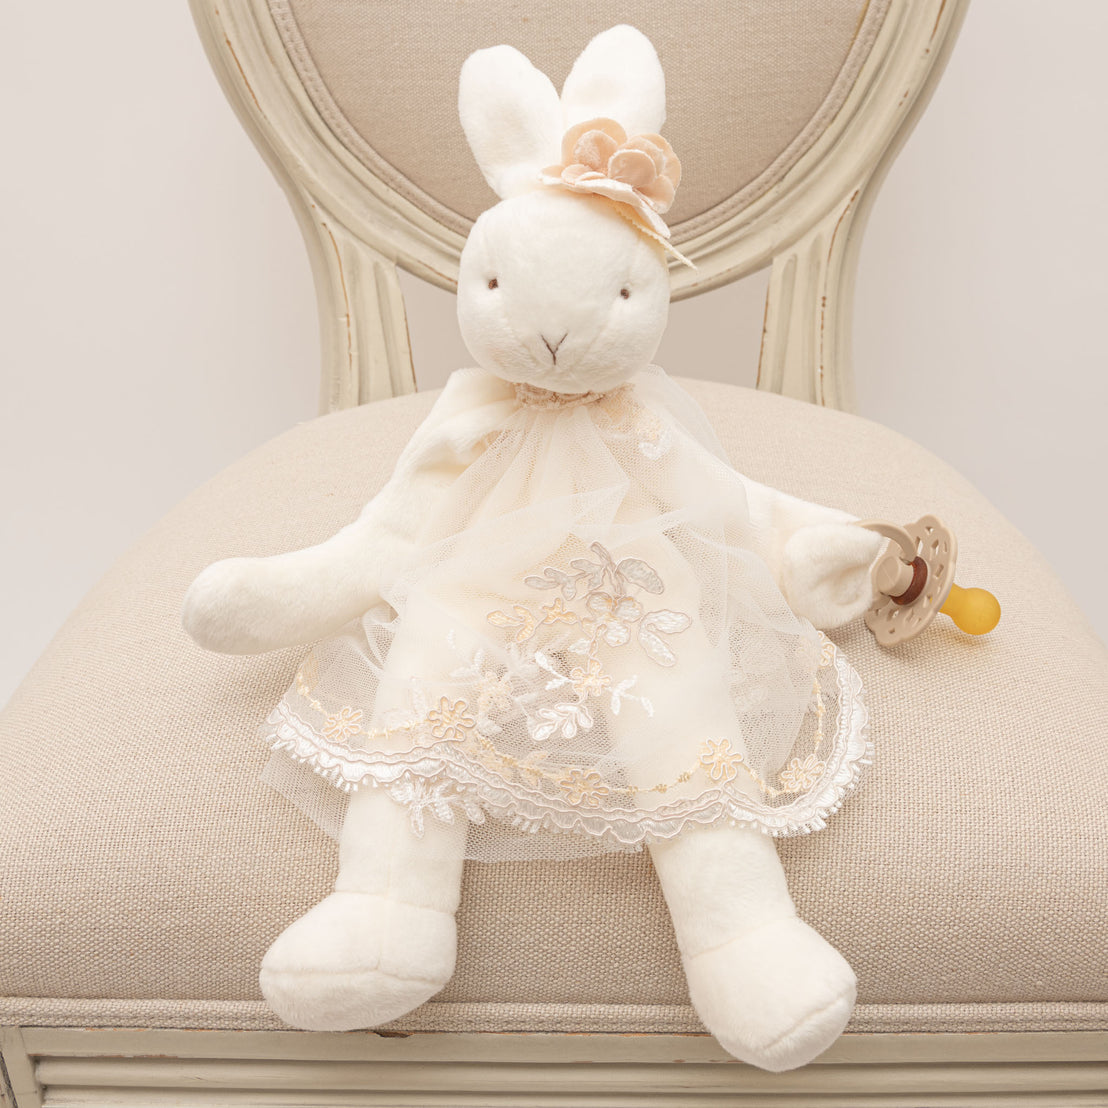 A Kristina Silly Bunny Buddy dressed in a delicate white dress with floral embroidery, sitting on a beige chair, holding a small pacifier, perfect for a christening.